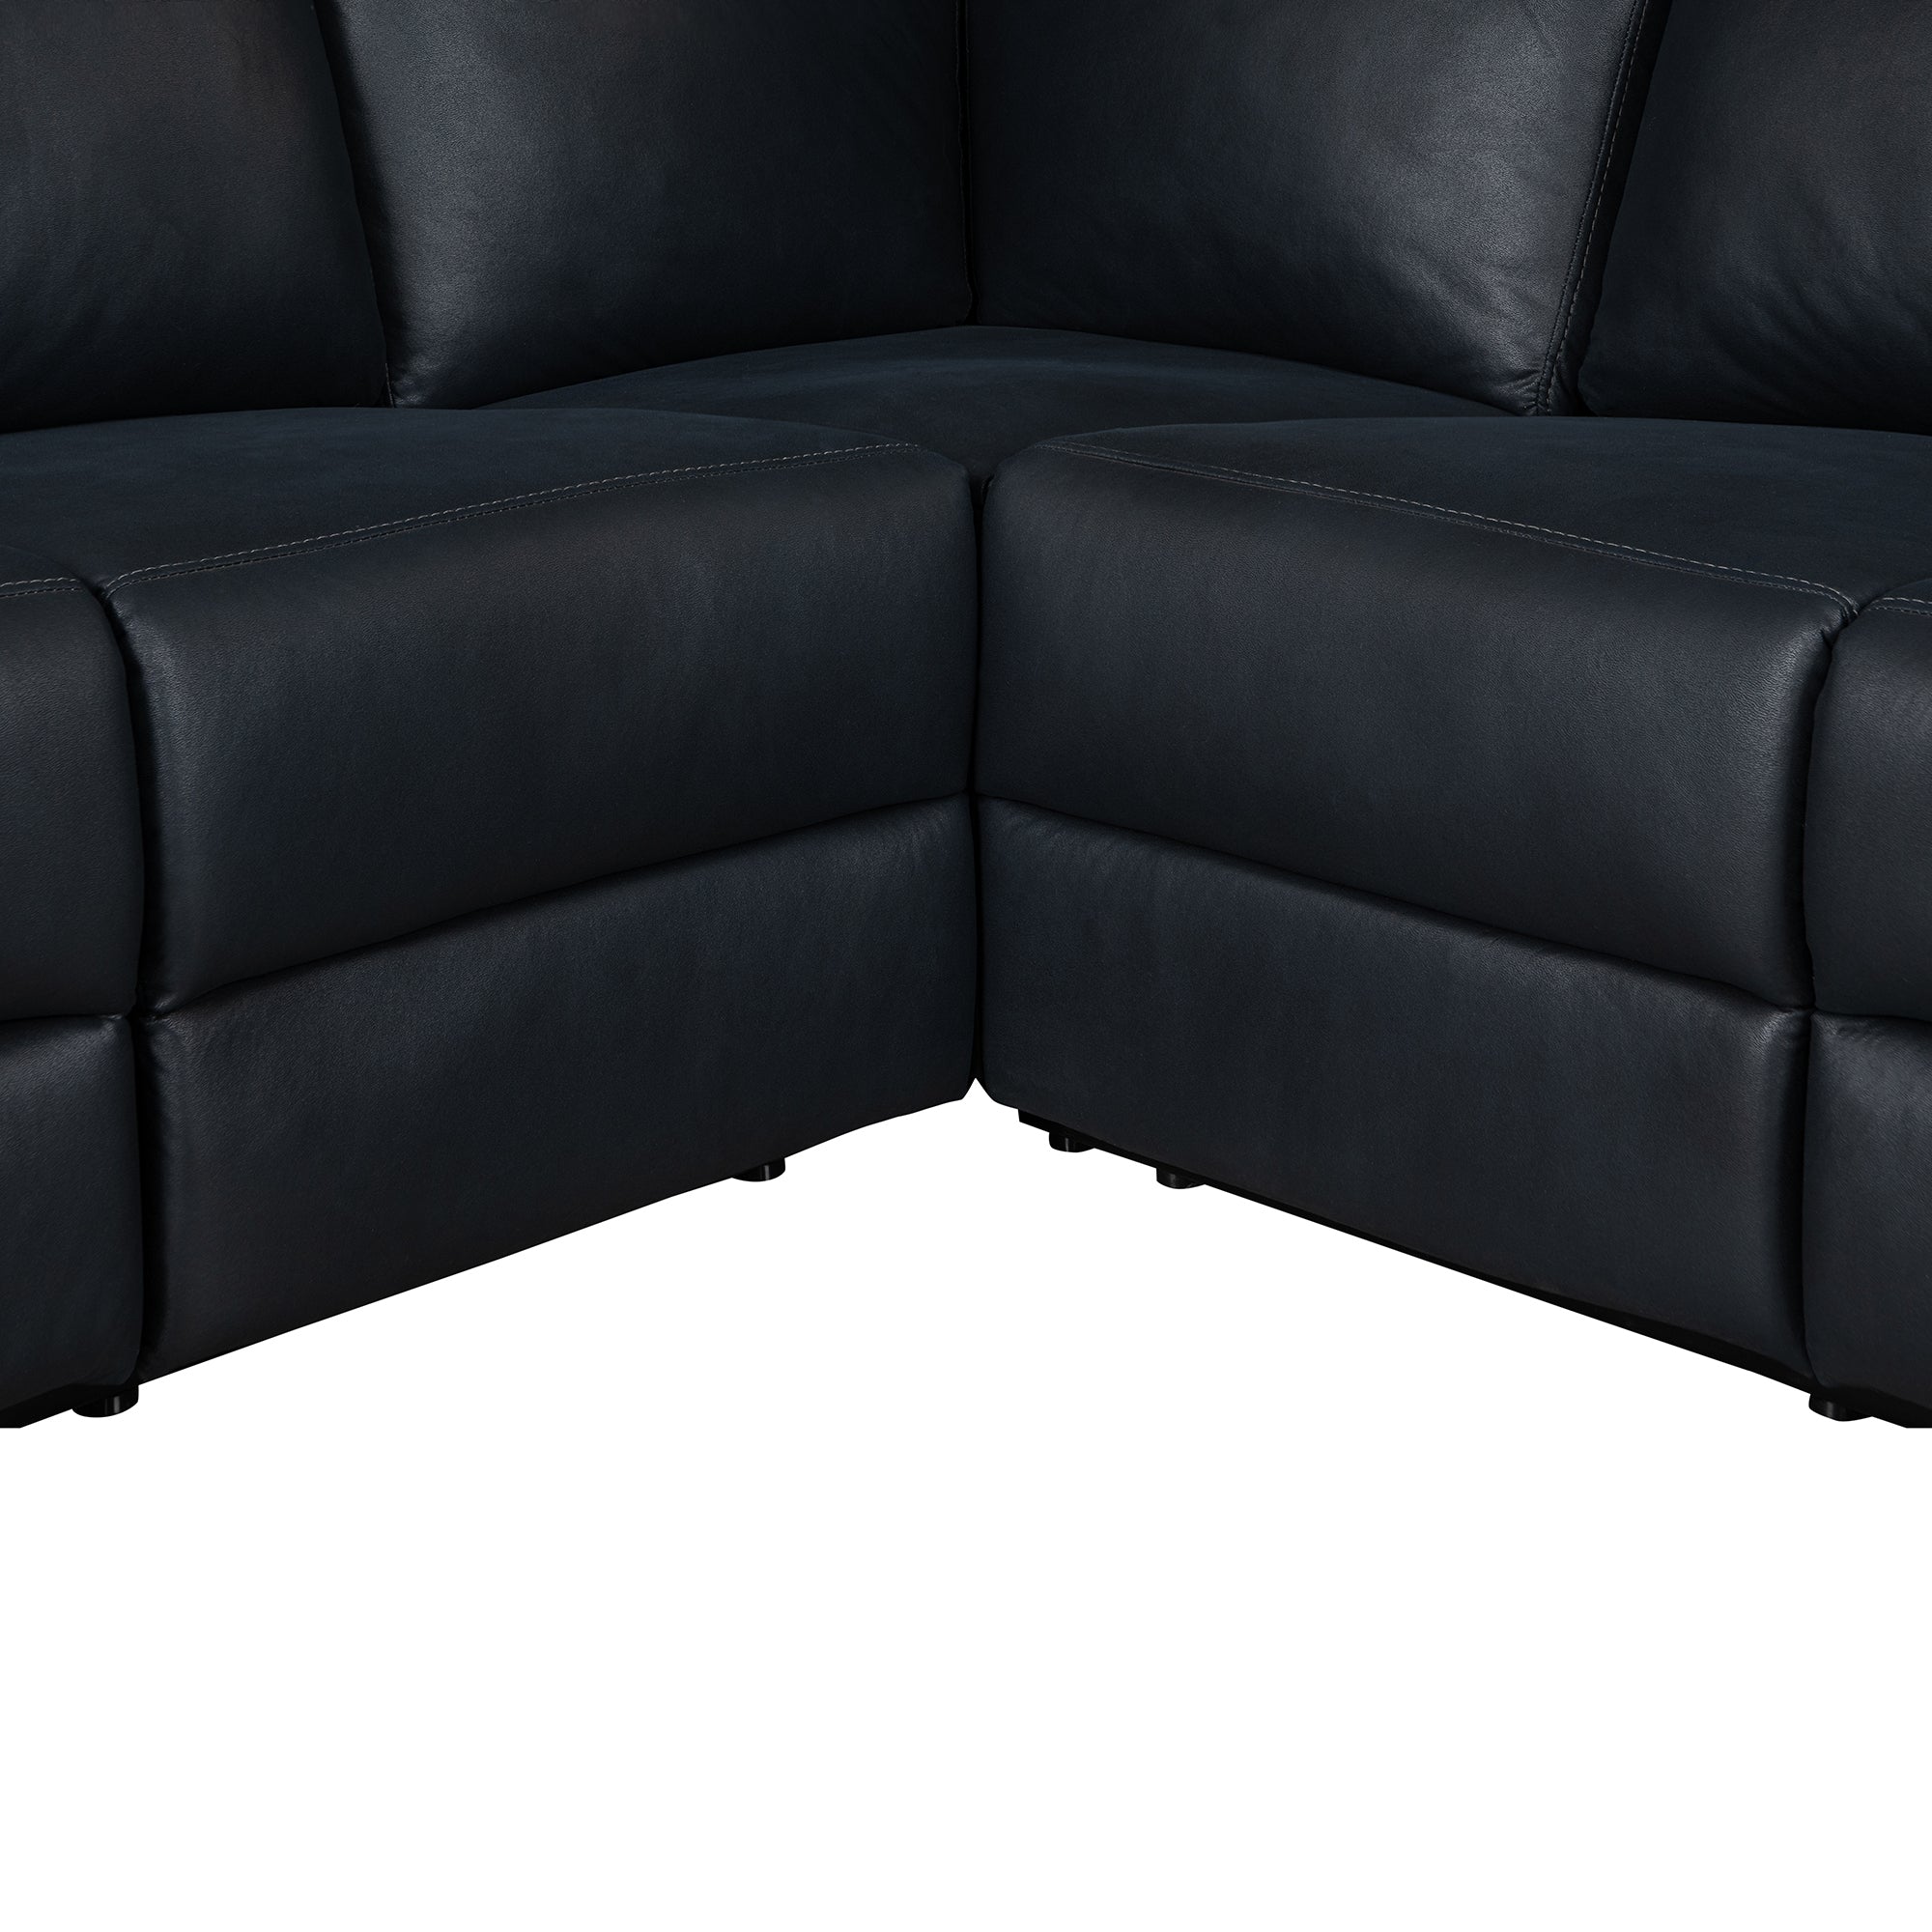 87.5" Home Theater Reclining Sectional Sofa w/ Cup Holders - Dark Blue-Reclining Sectionals-American Furniture Outlet